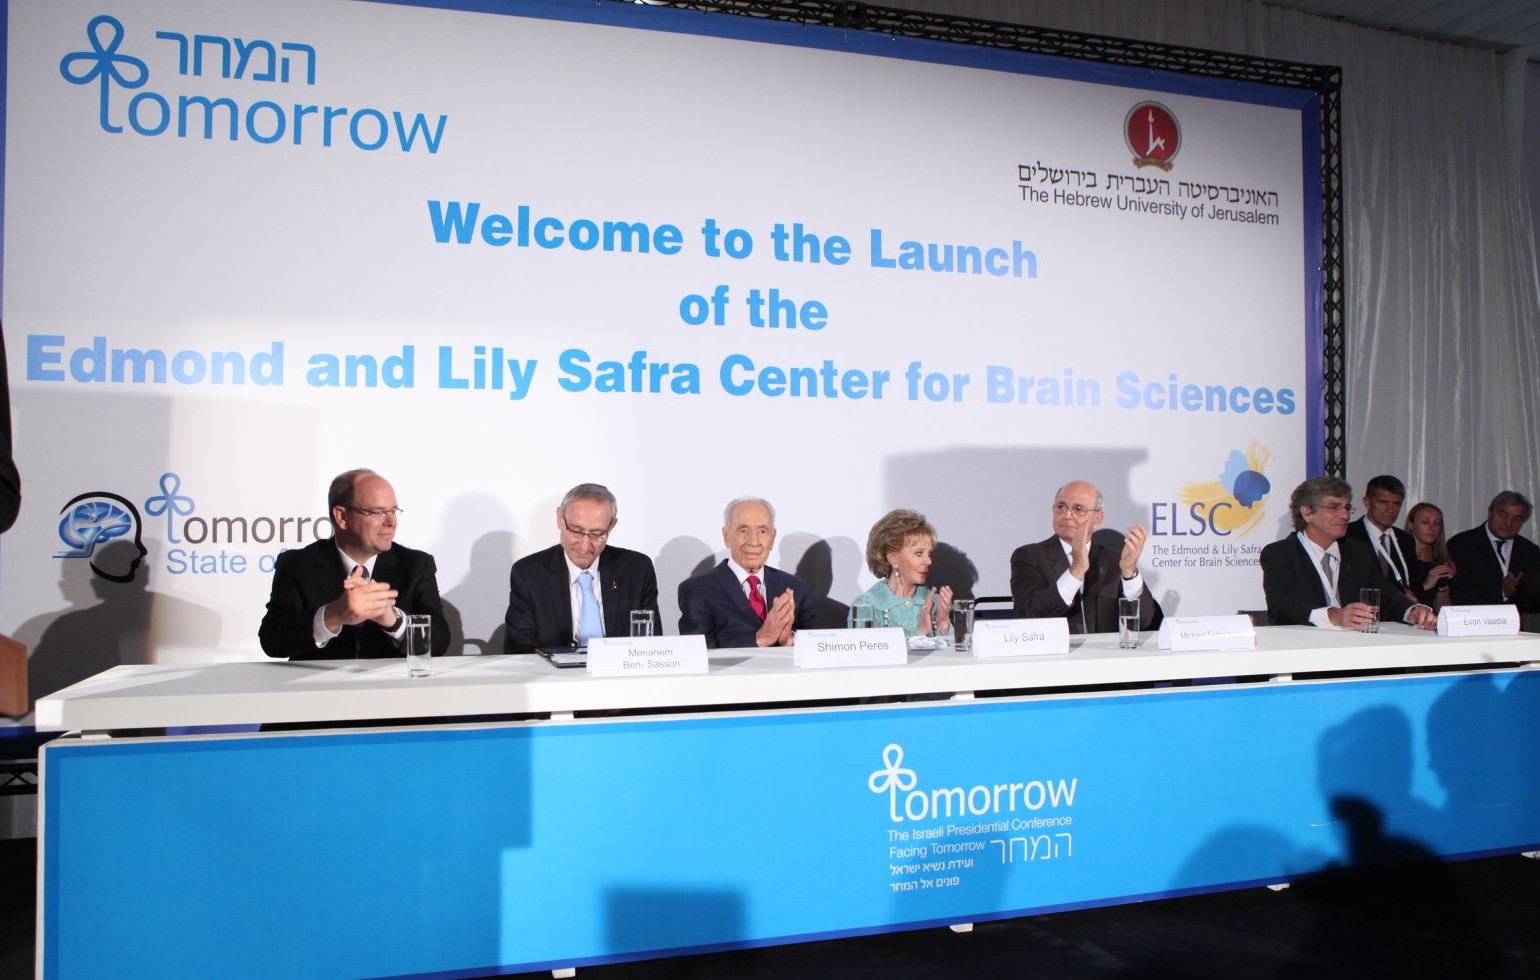 The Edmond and Lily Safra Center for Brain Sciences launches at the Presidential Conference in Jerusalem.